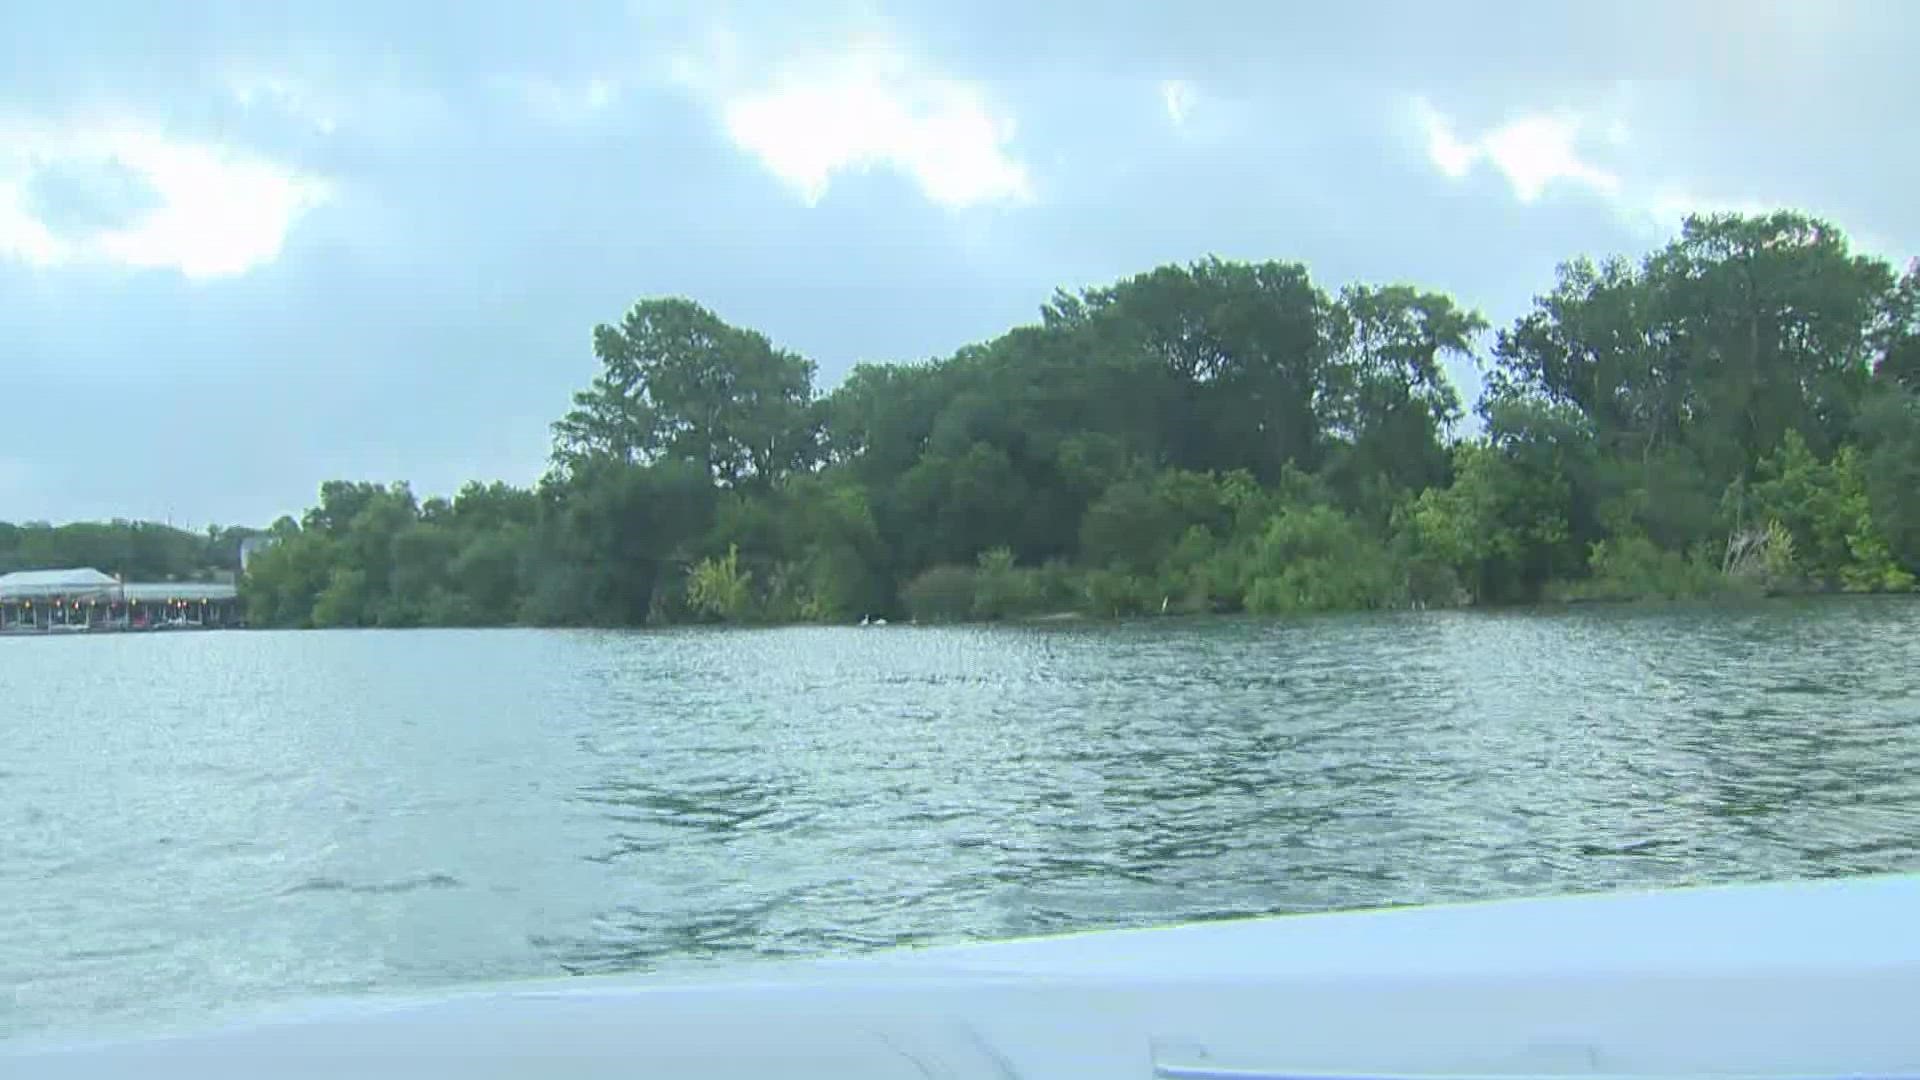 If you're headed out on the water, make sure you're staying safe. KVUE's Dominique Newland has some boating safety tips.